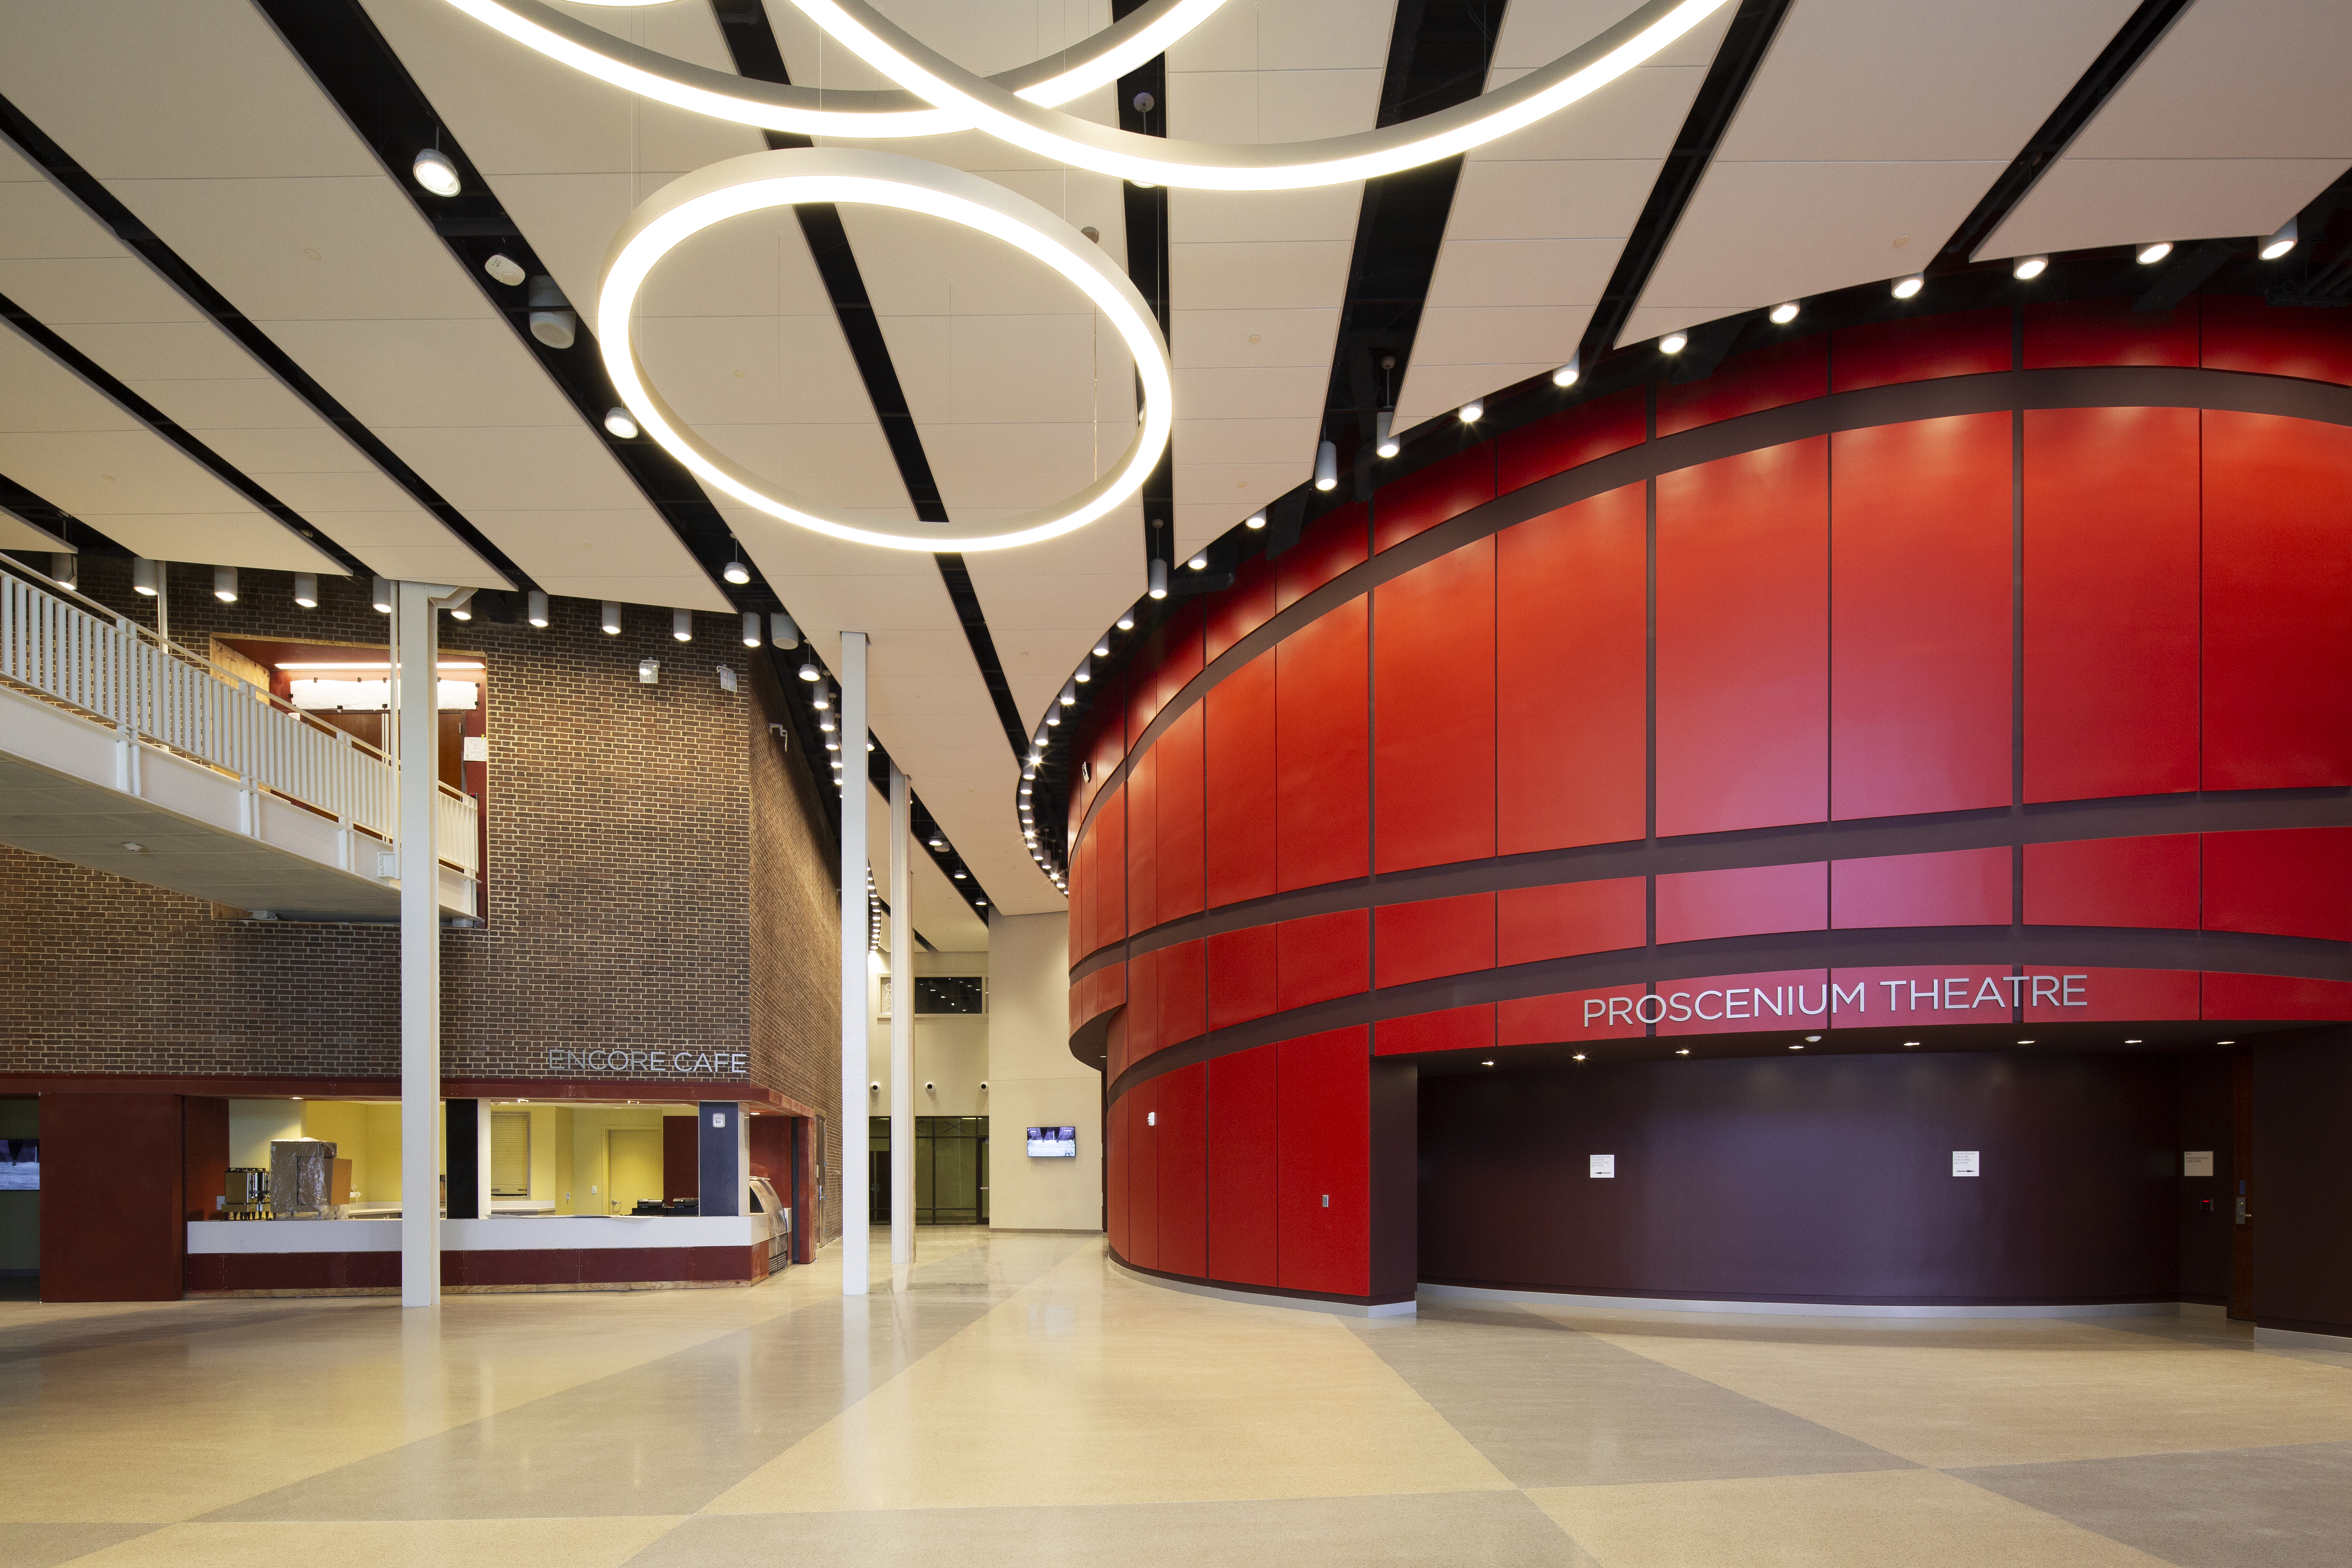 Henry Adams provided the MEP engineering design for the performing arts center